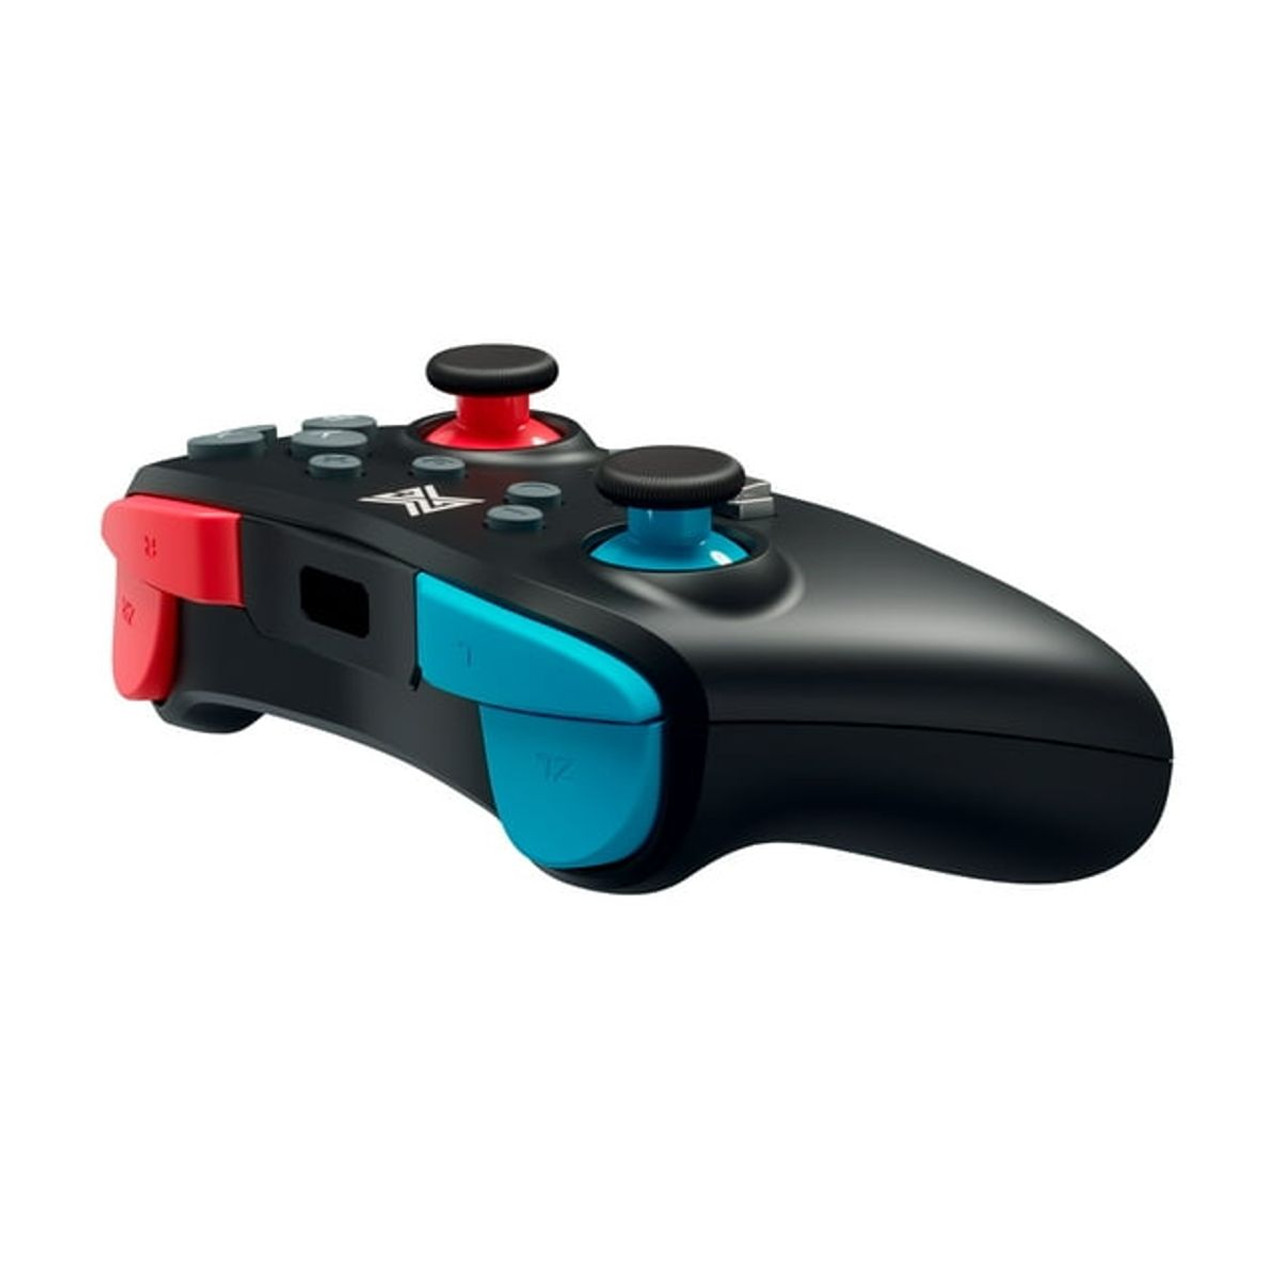 Mobile Gaming Corps™ Switchplate Wireless Controller for Switch & Windows PC product image